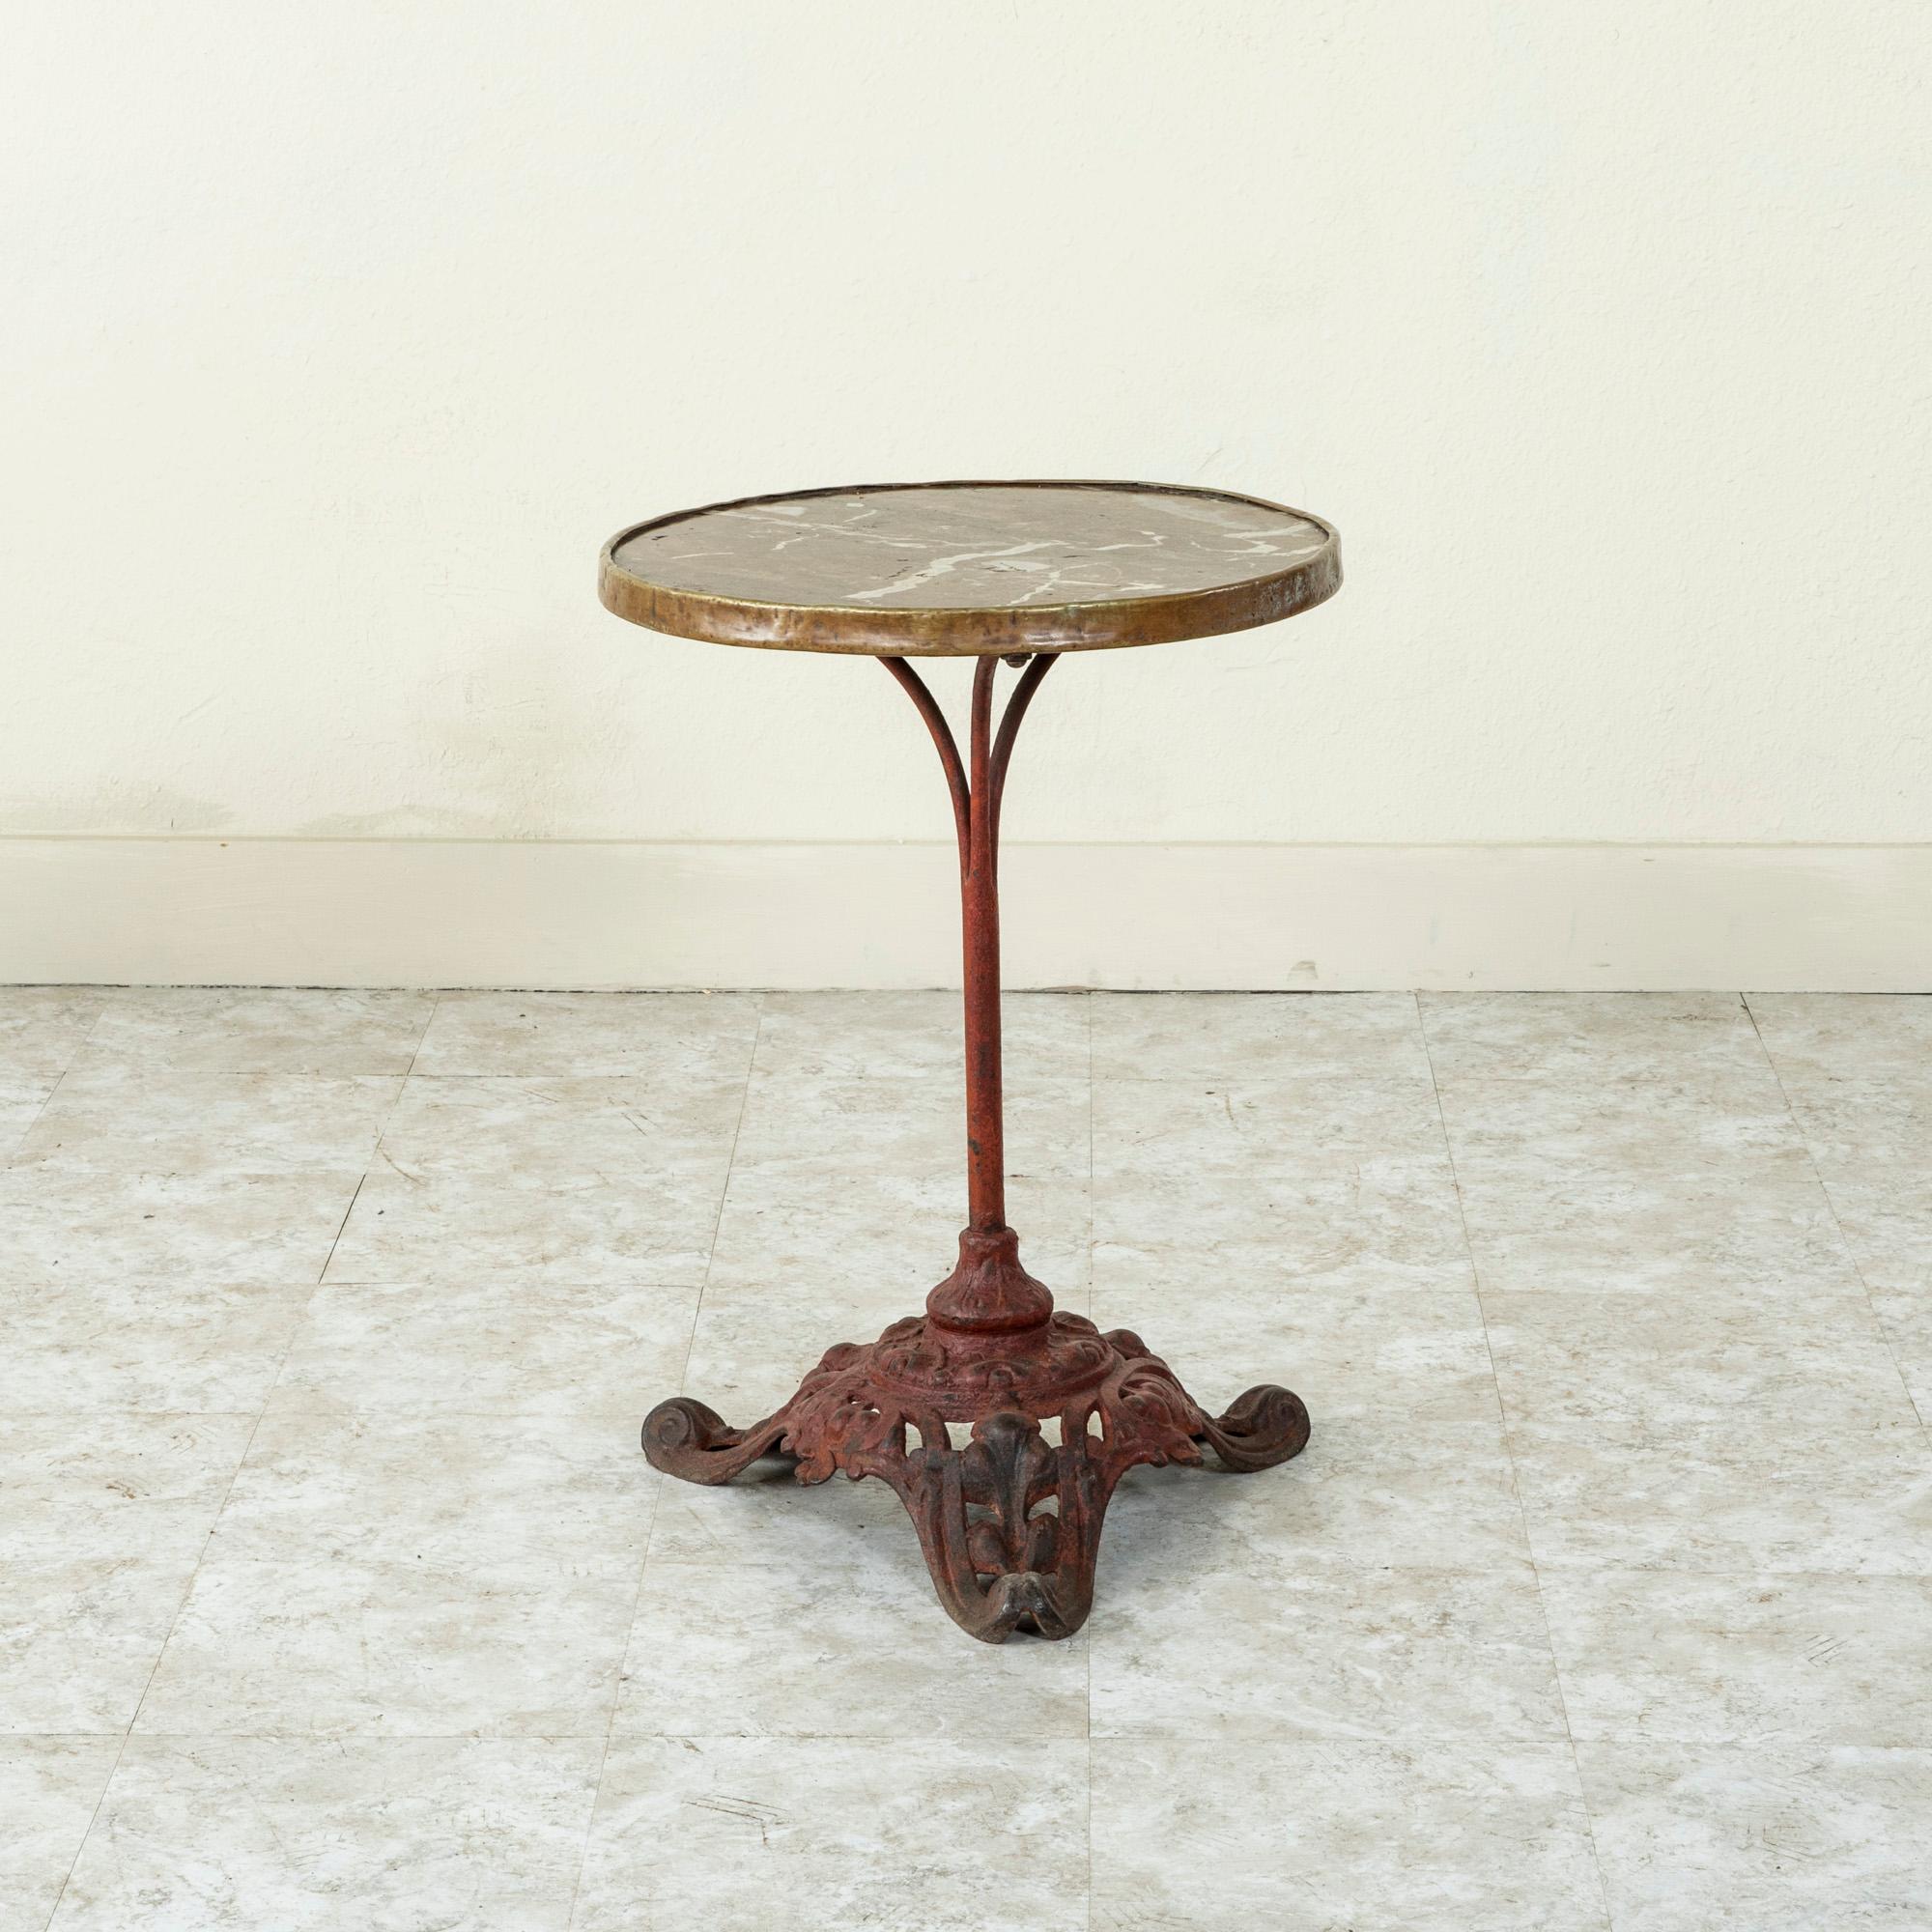 This French round bistro table from the late nineteenth century features an iron pedestal base and a deep rose colored marble top with white veining. The marble is trimmed in brass and joins the base with three arm supports. The base is painted red